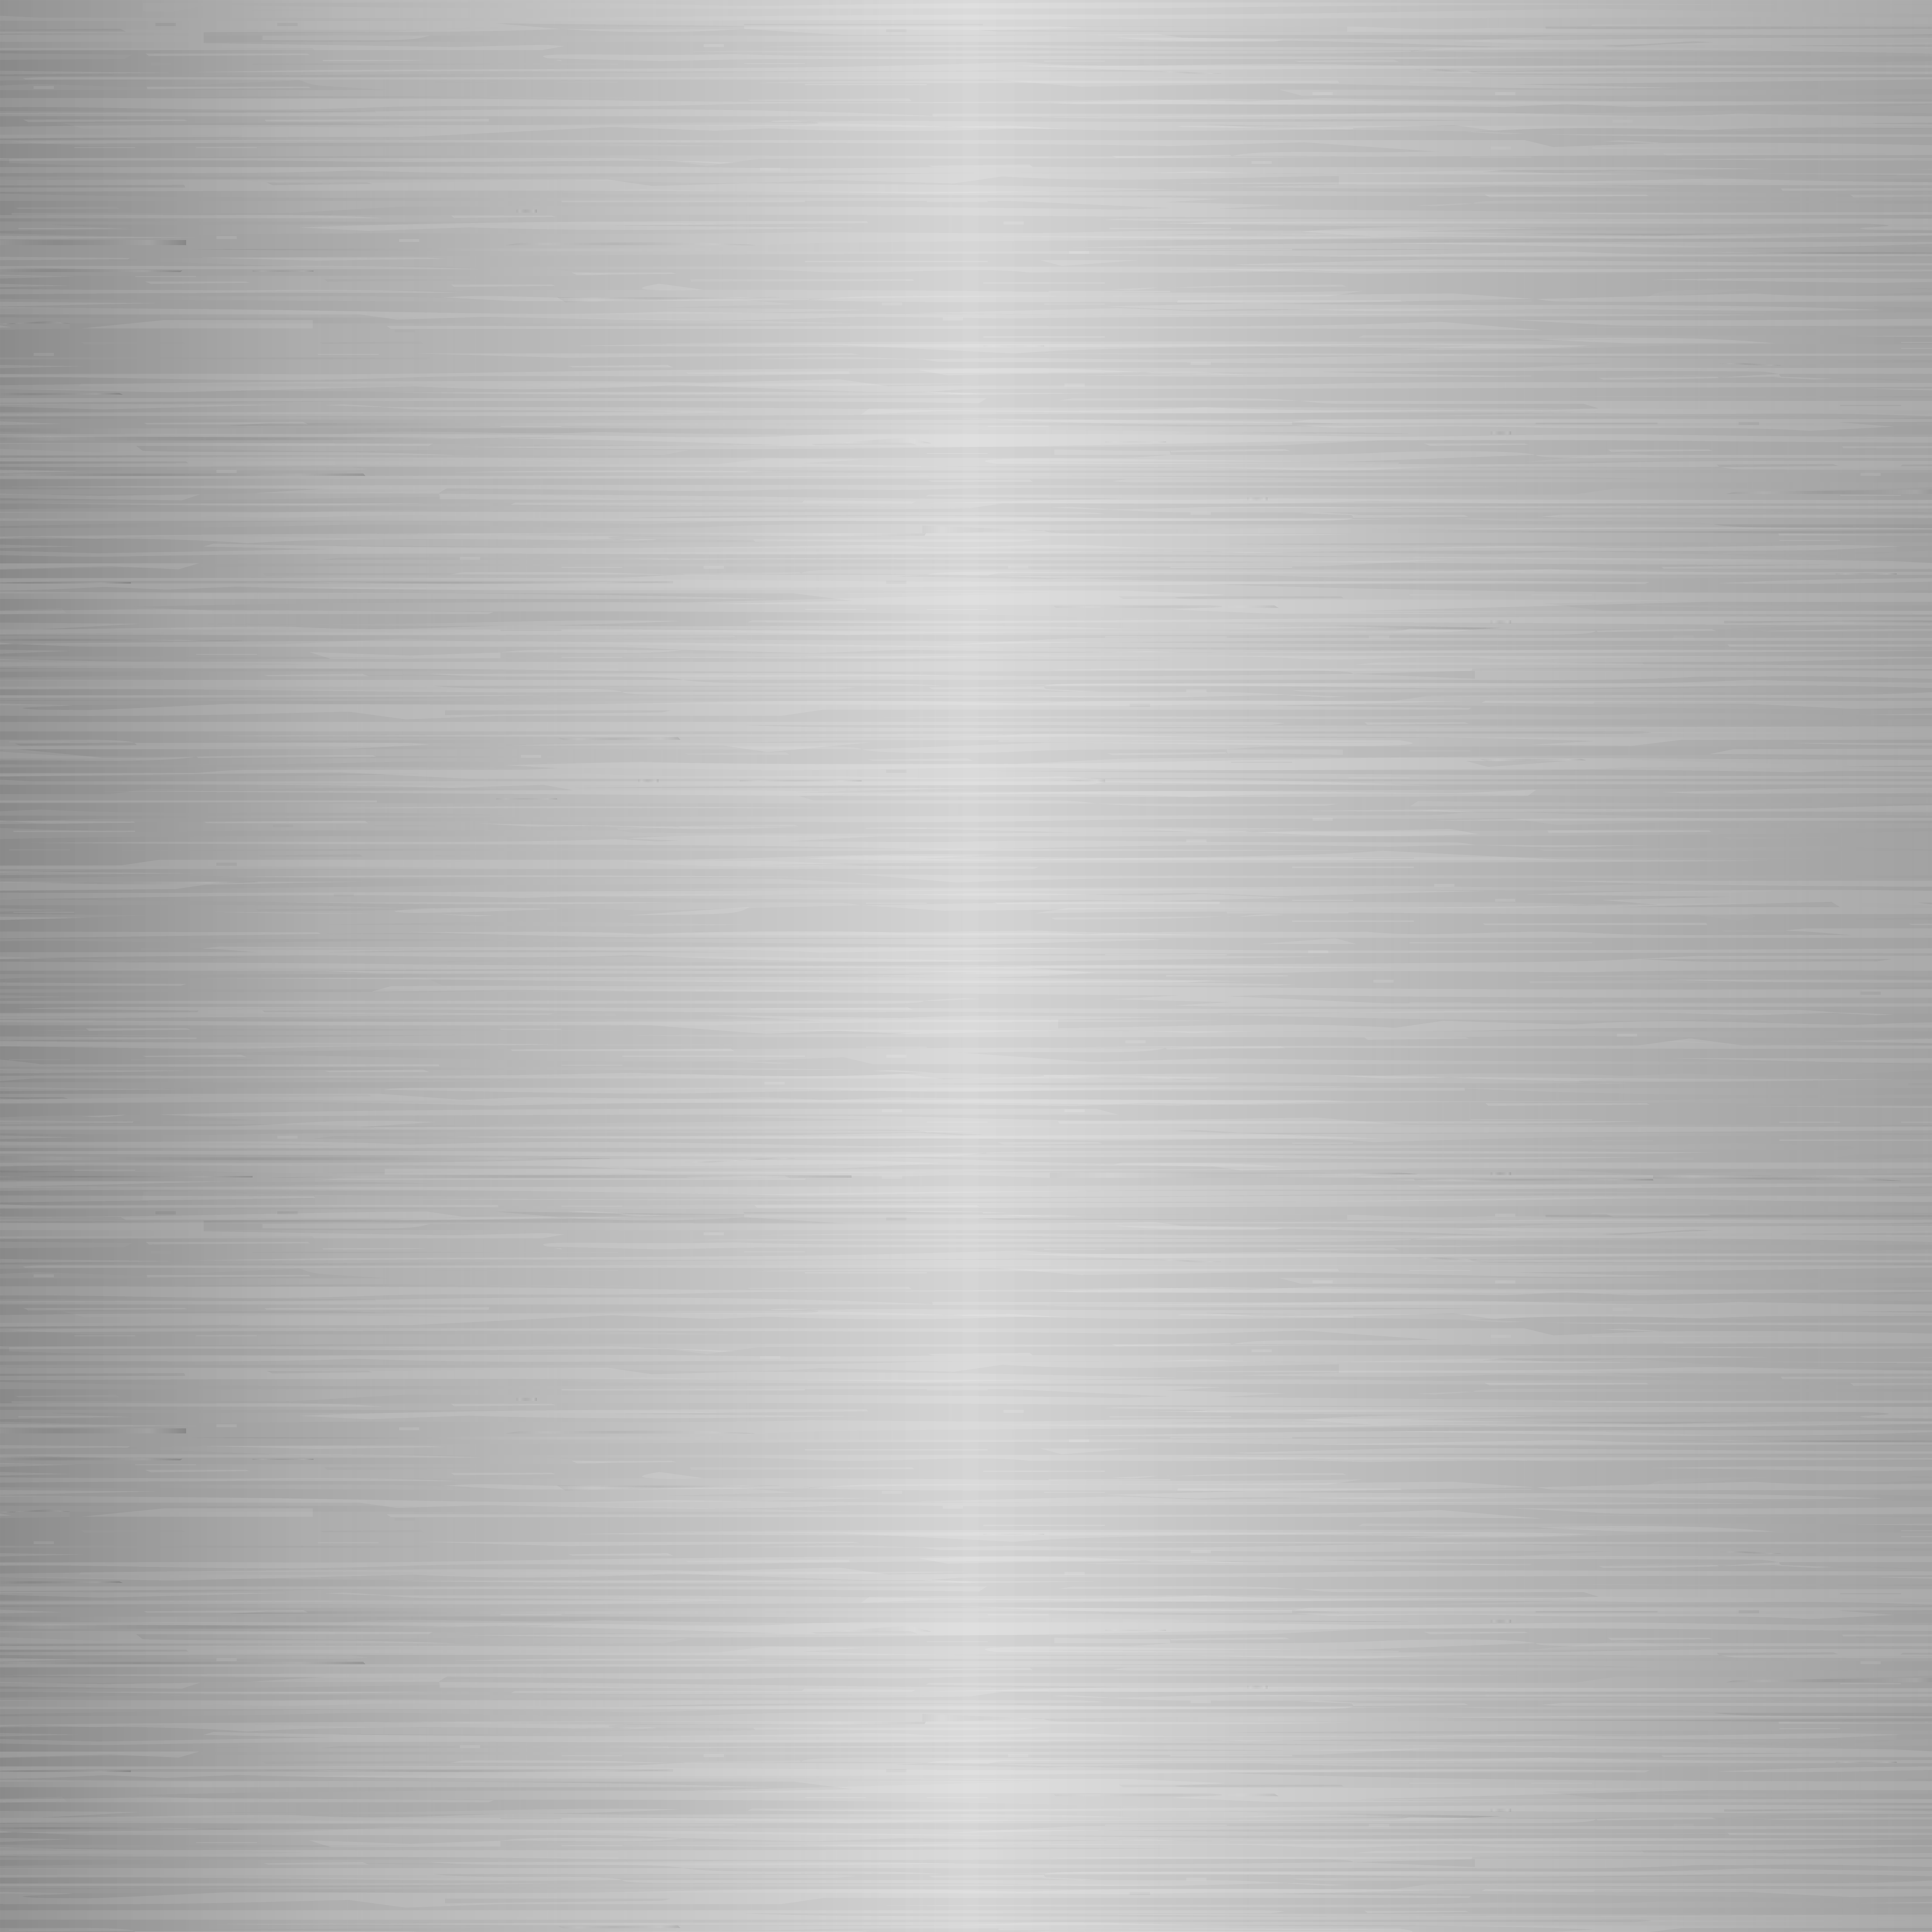 Silver Metal Background.